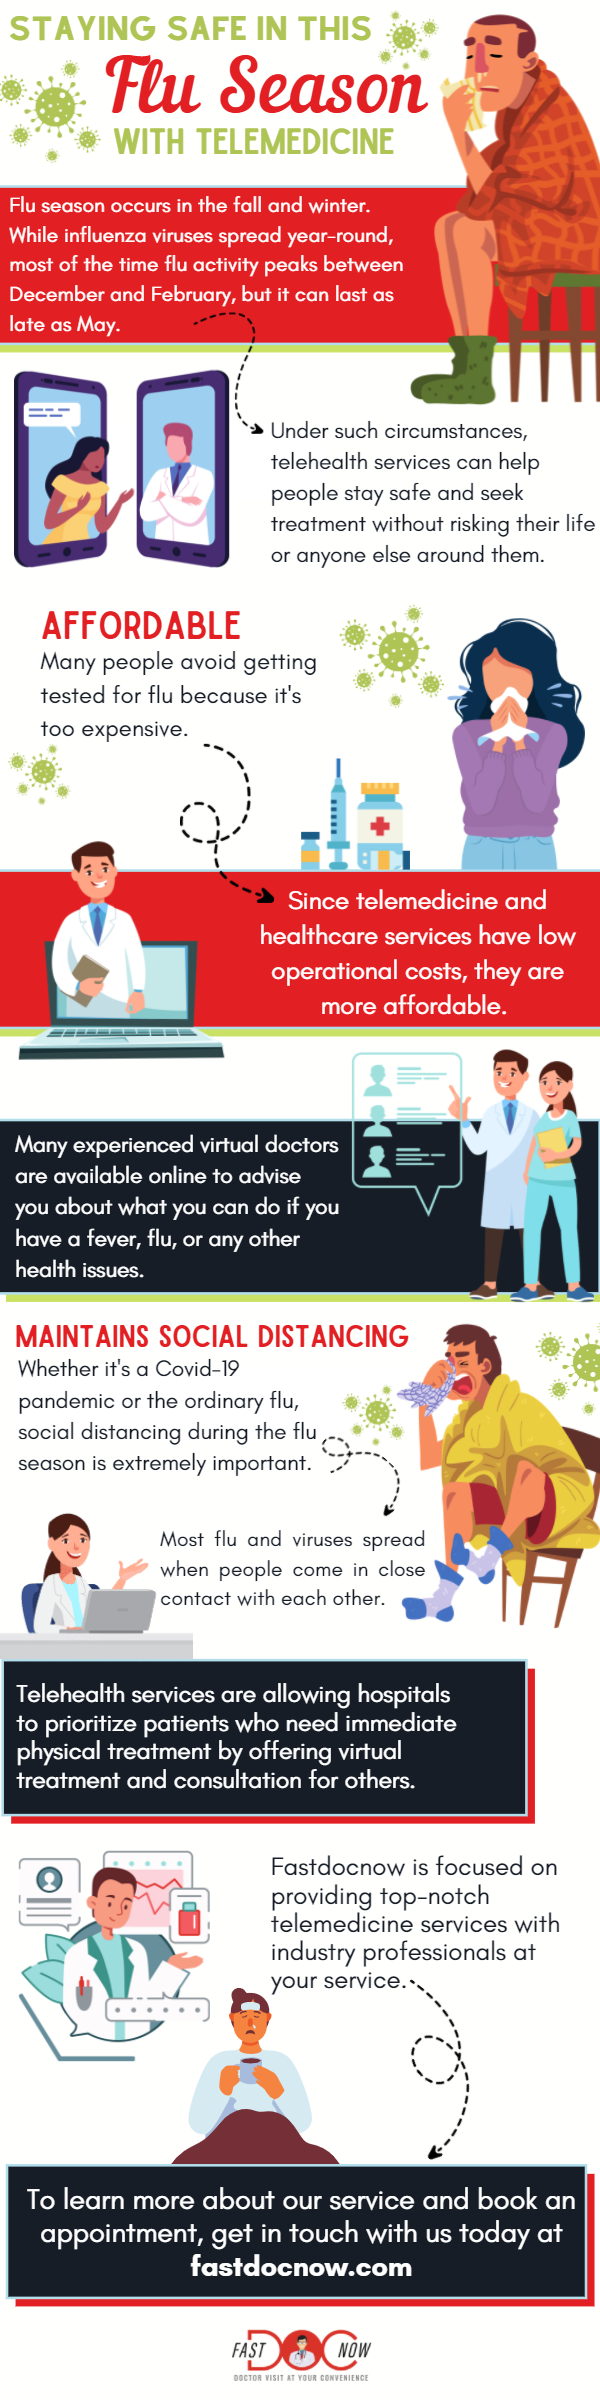 Staying Safe In This Flu Season With Telemedicine